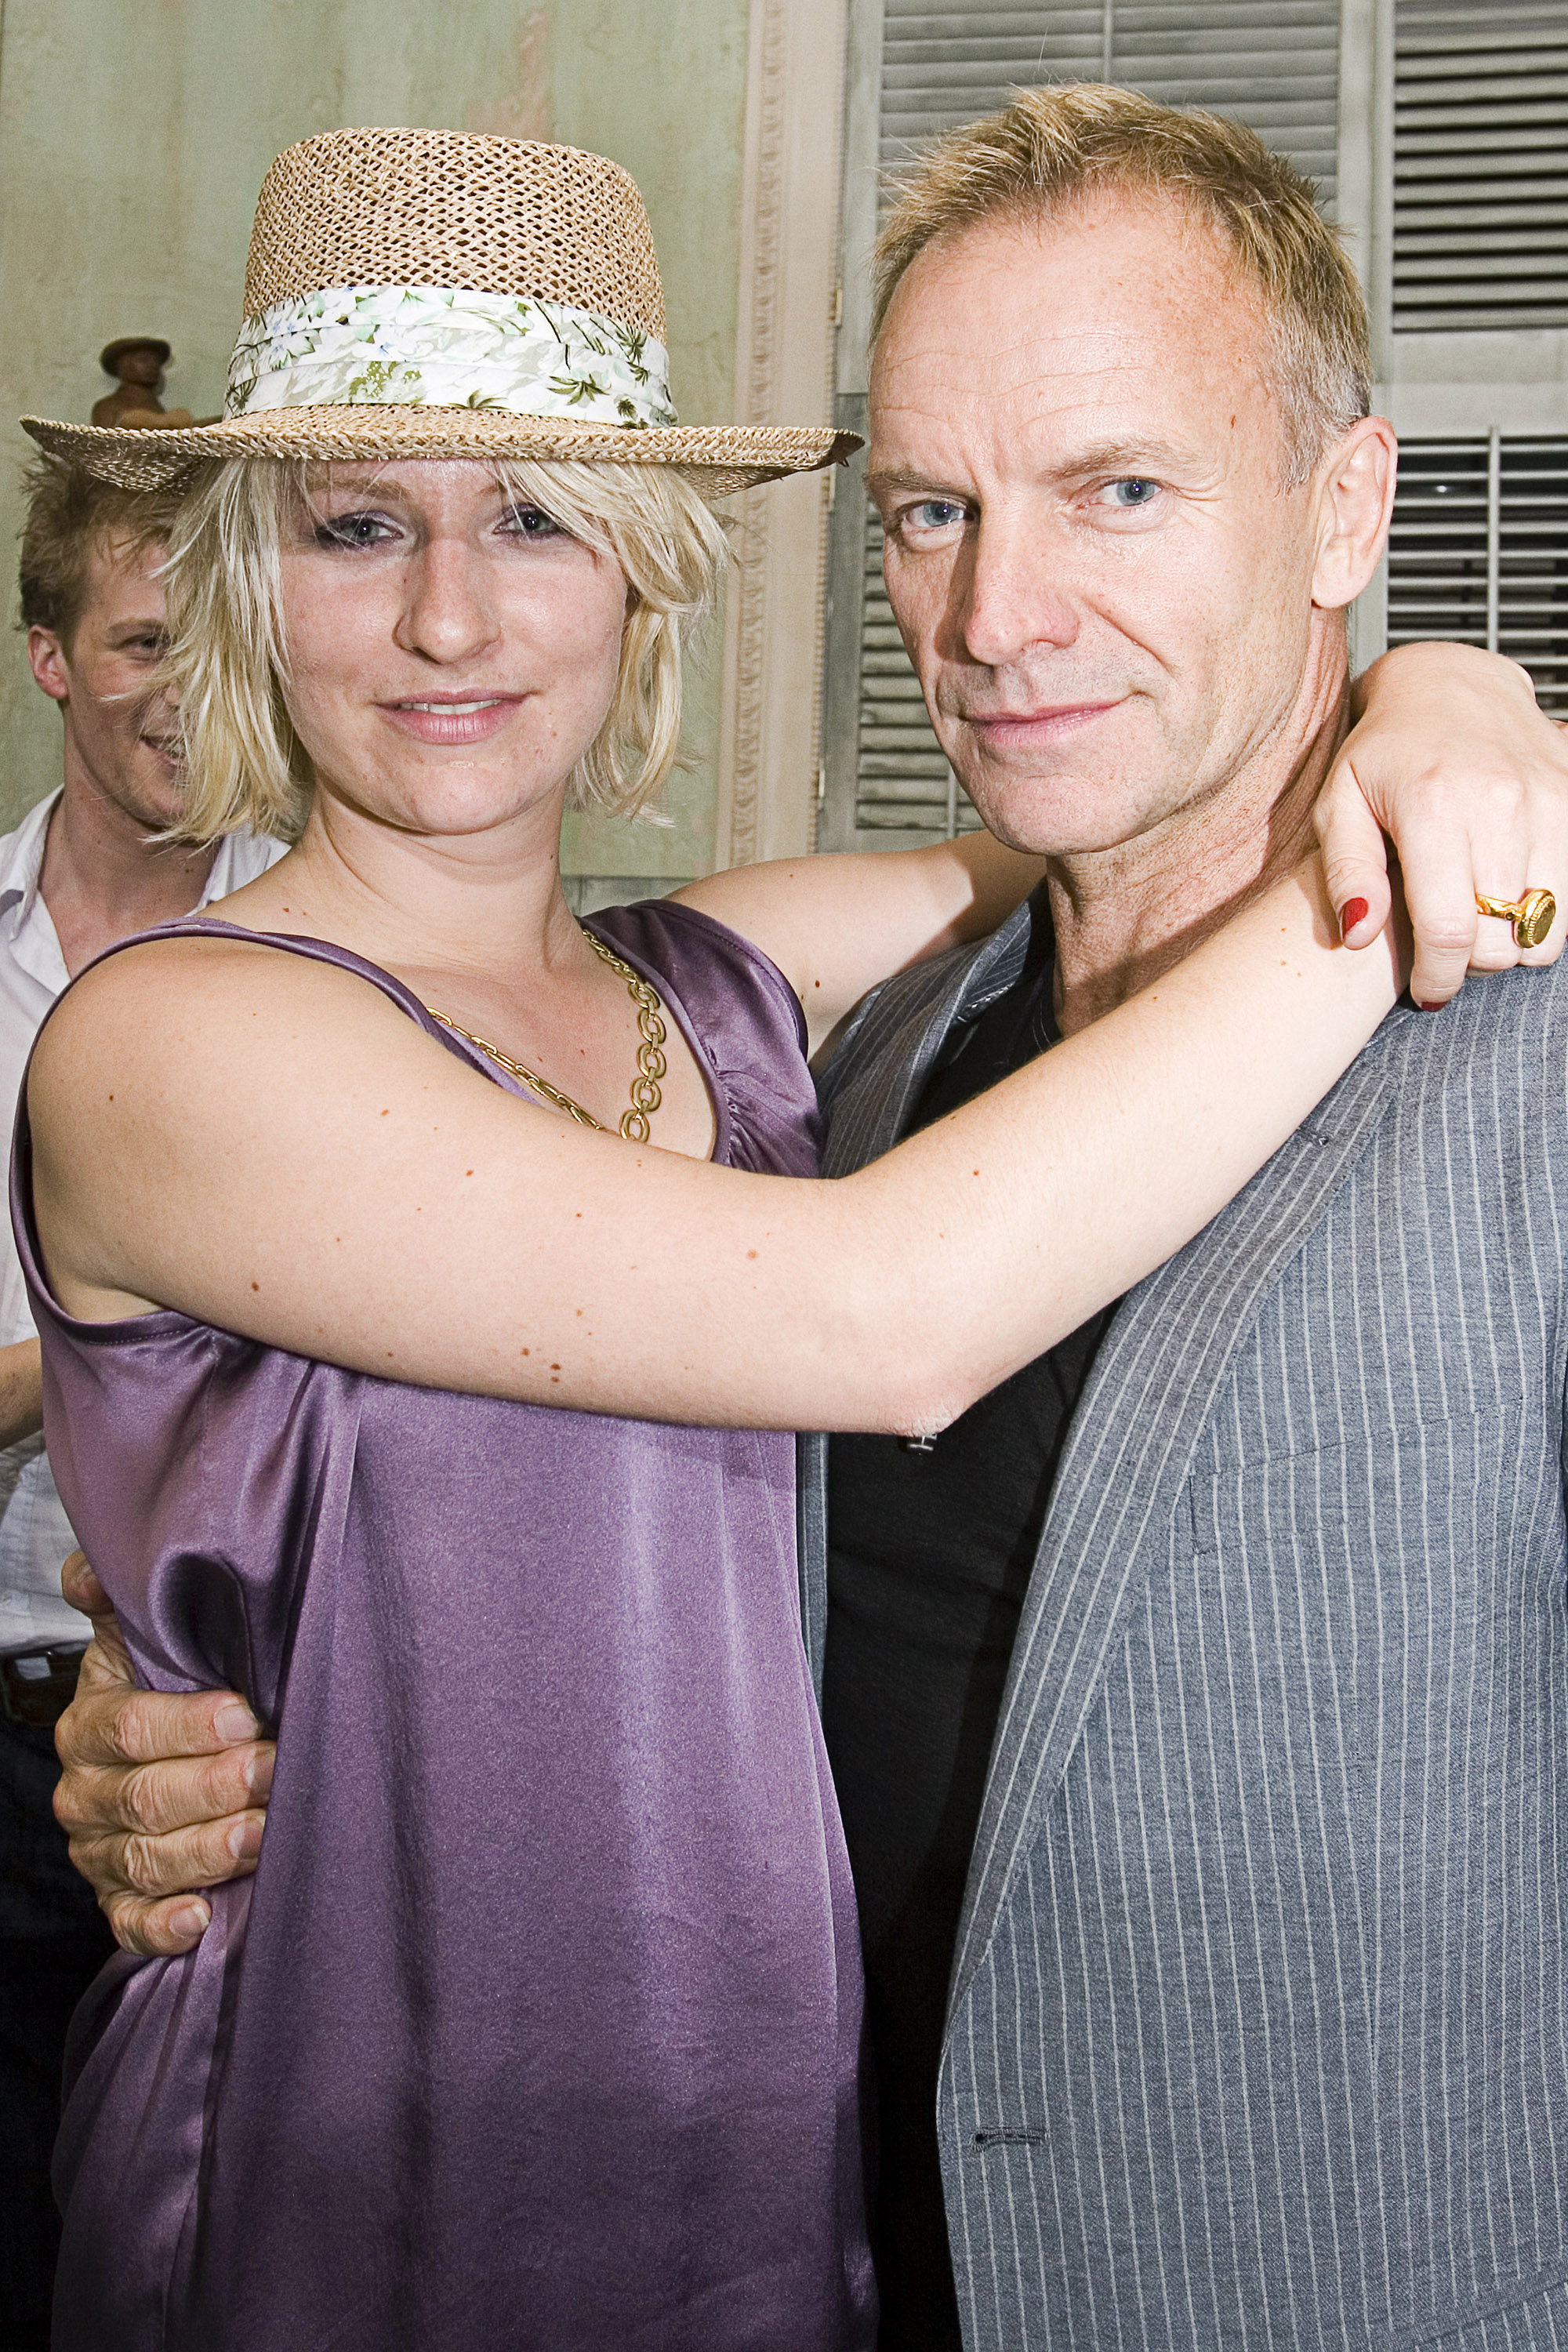 Mickey Sumner and Sting during her graduation party at Ye Waverly Inn in New York City on May 18, 2007. | Source: Getty Images